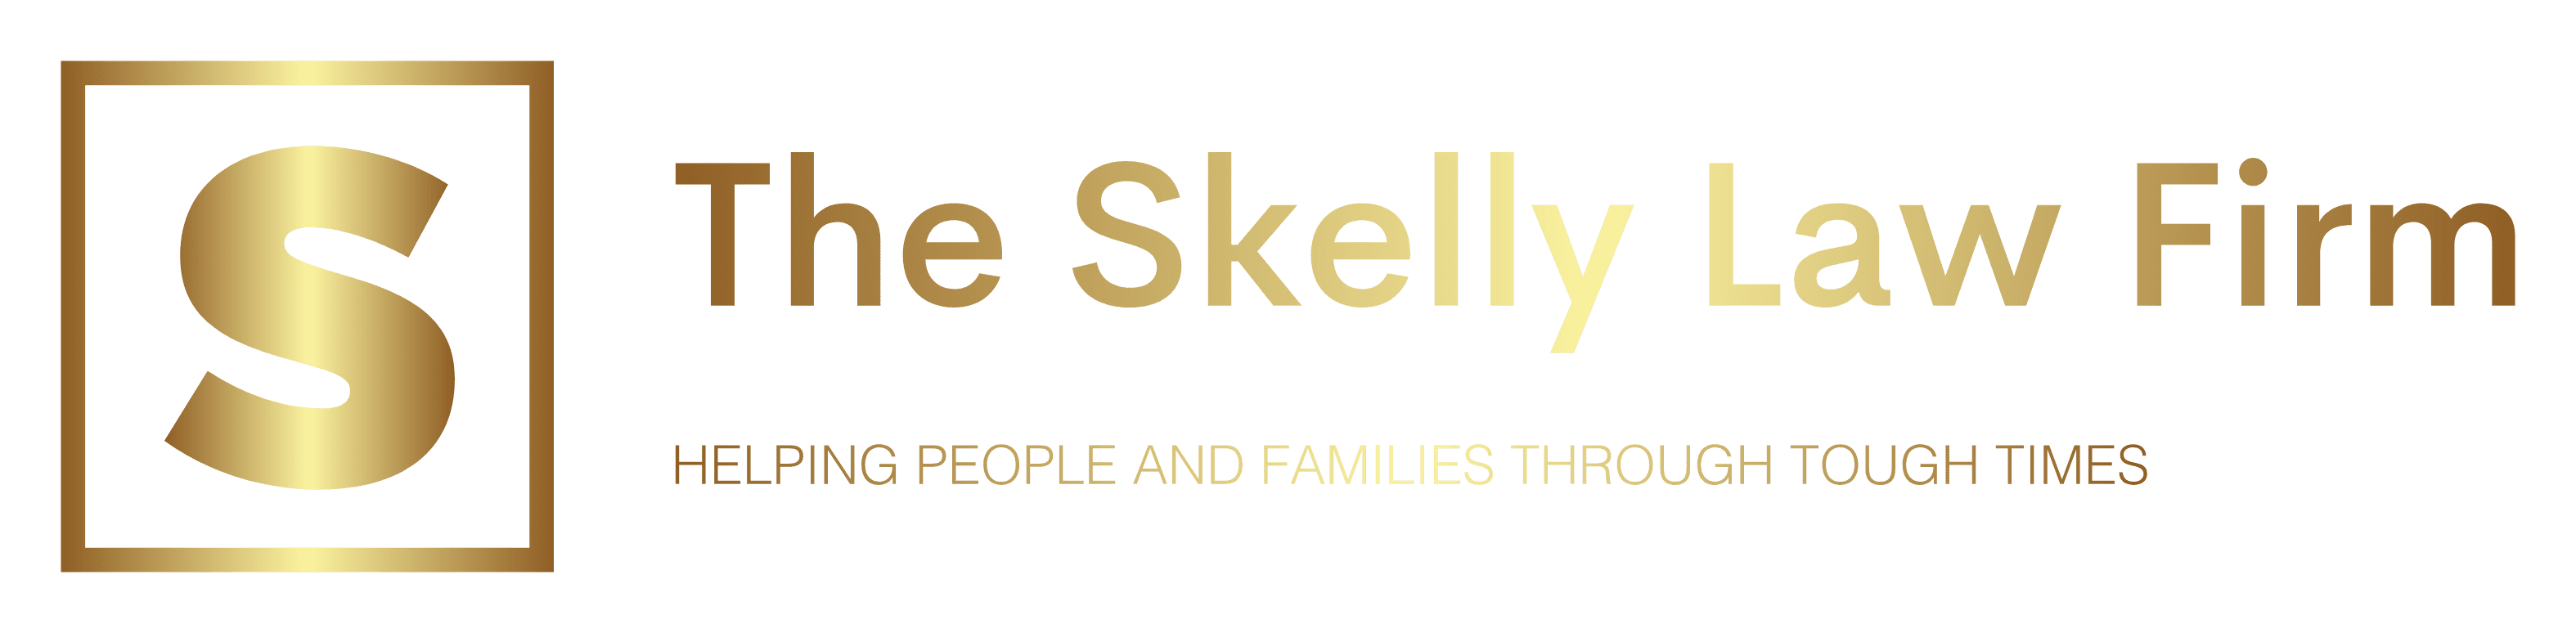 The Skelly Law Firm